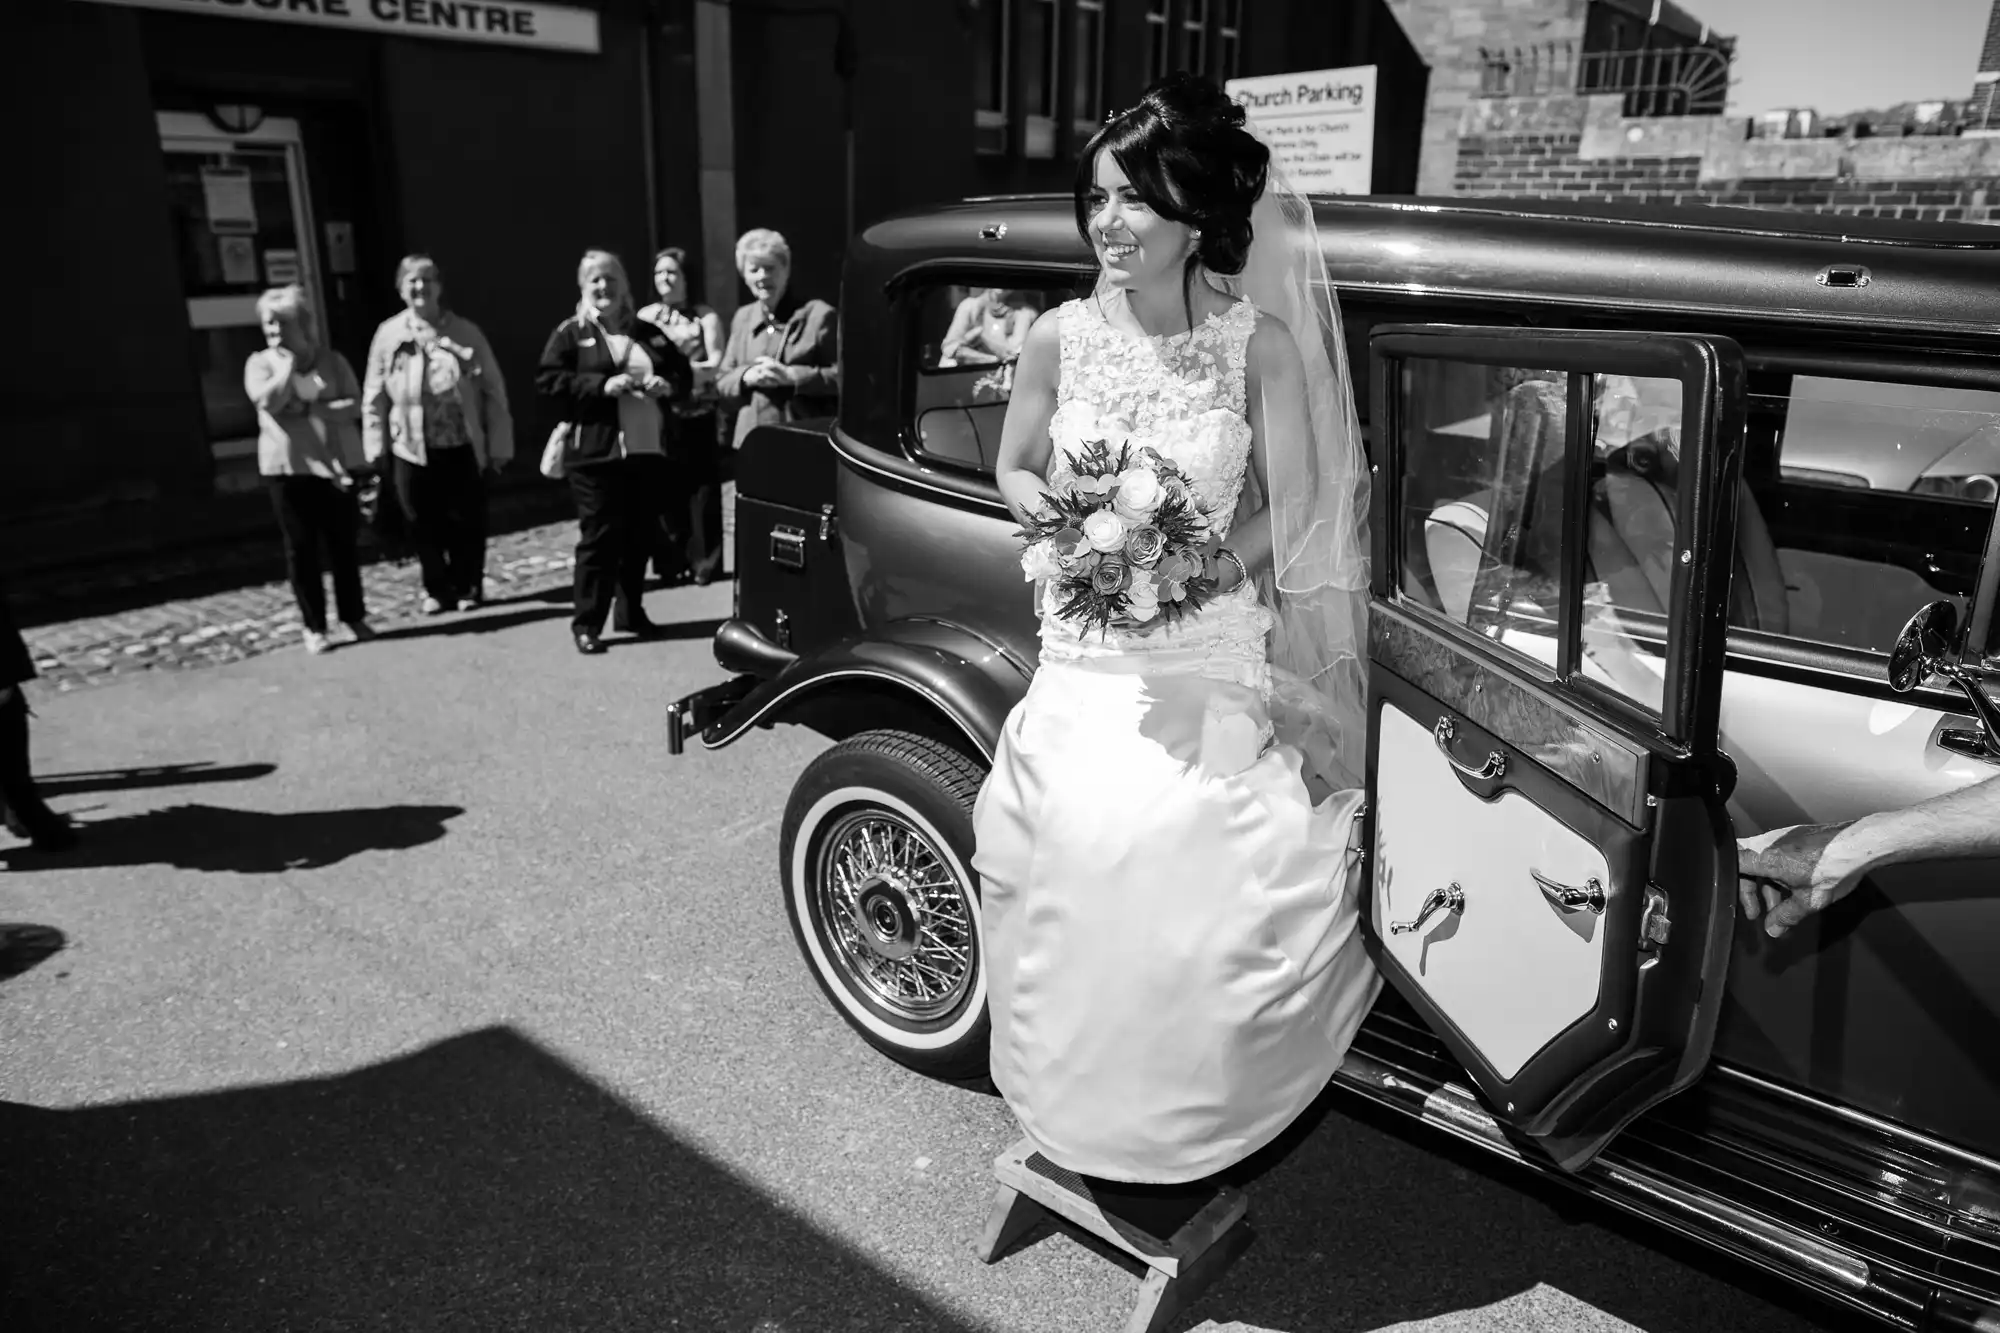 A bride stepping out of a vintage car, holding a bouquet, with onlookers in the background.